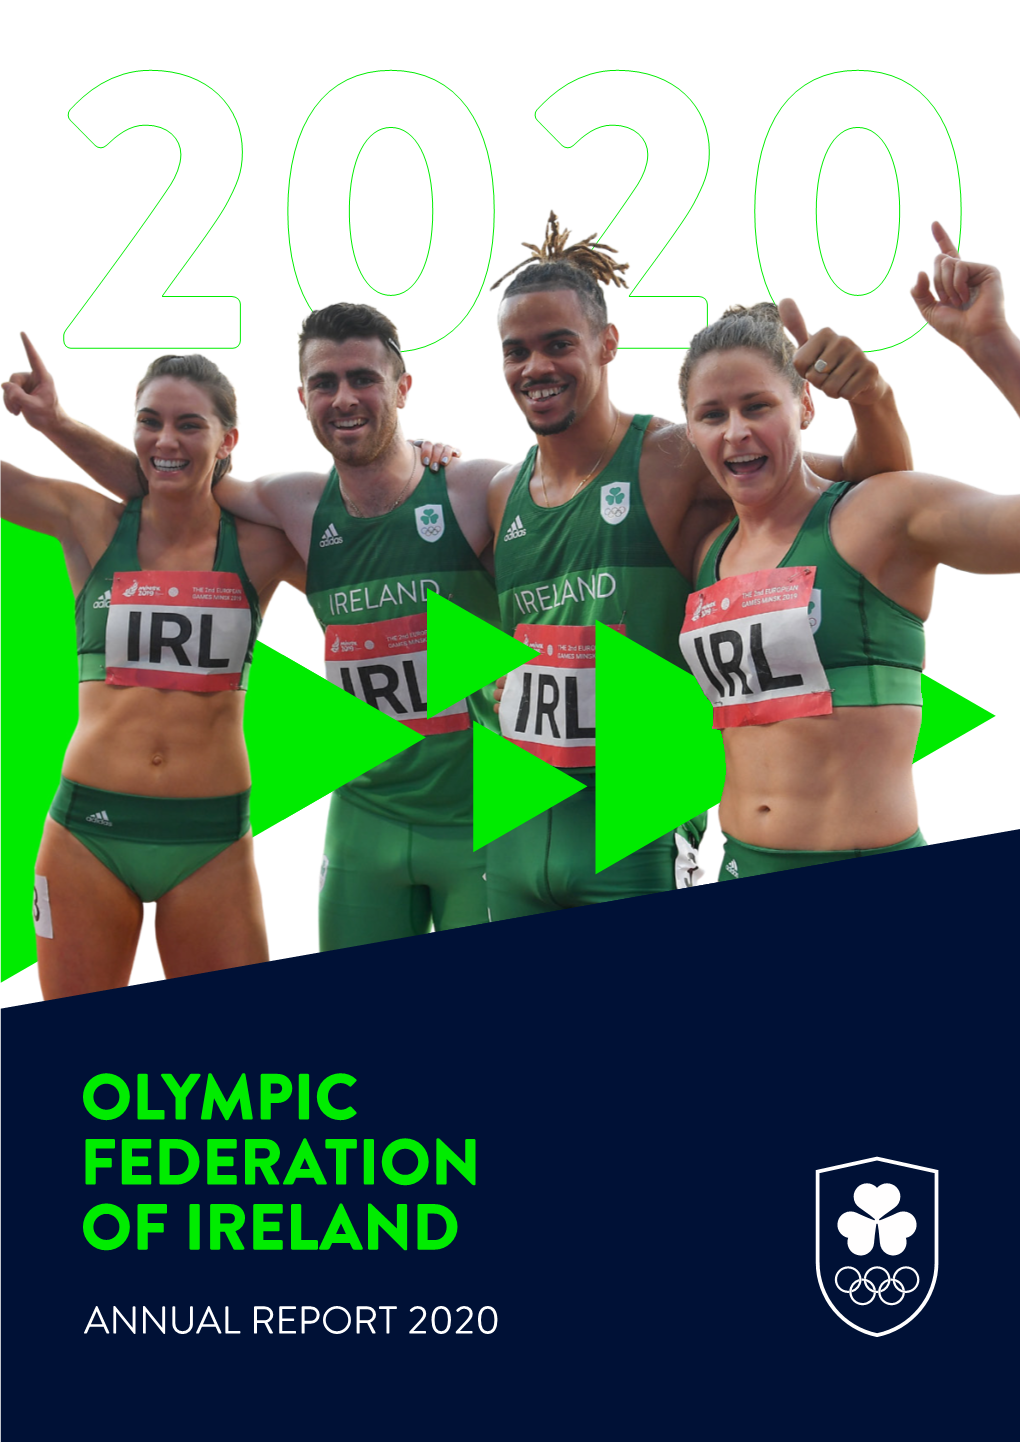 Here Is No Doubt That Tokyo Will Be One of the Most Challenging and Complex Games Ever Faced by Irish Athletes